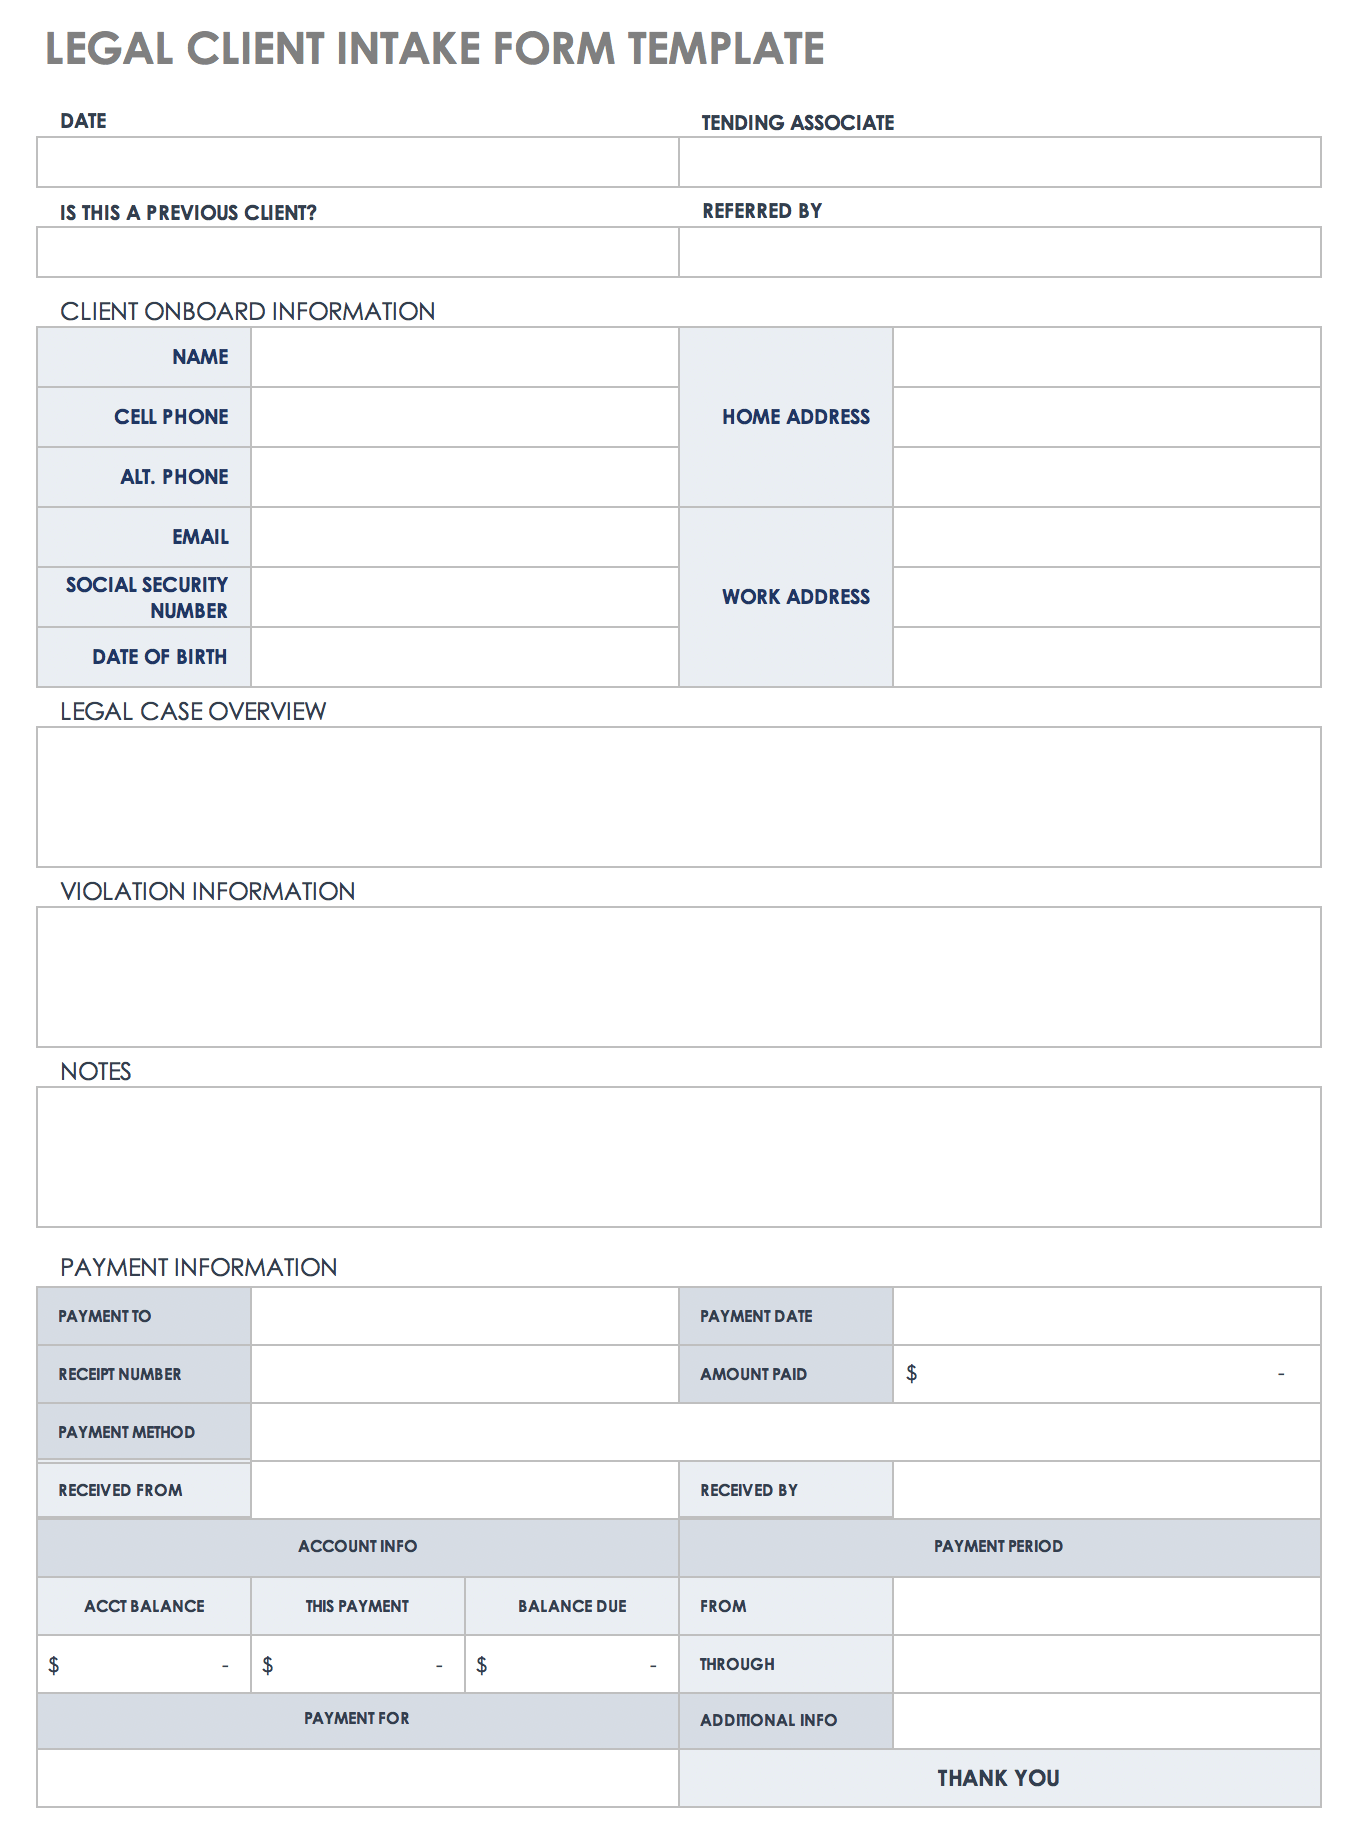 free-intake-form-template